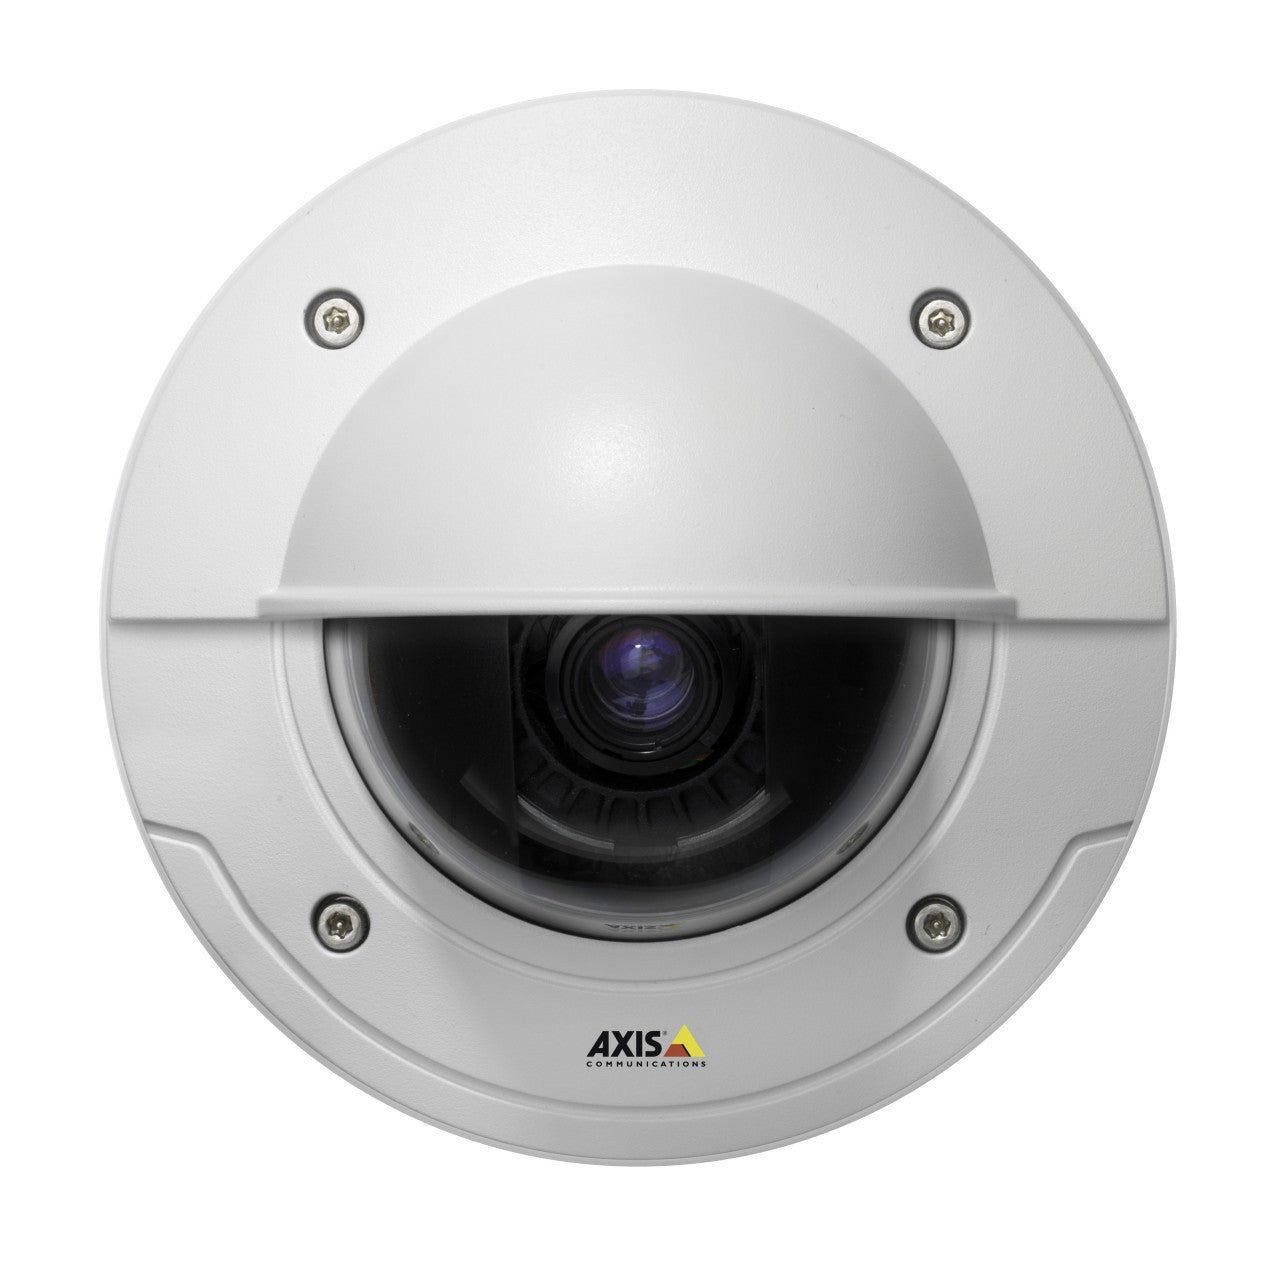 AXIS P3367-V (0406-001) 5MP Outdoor Dome Network Camera